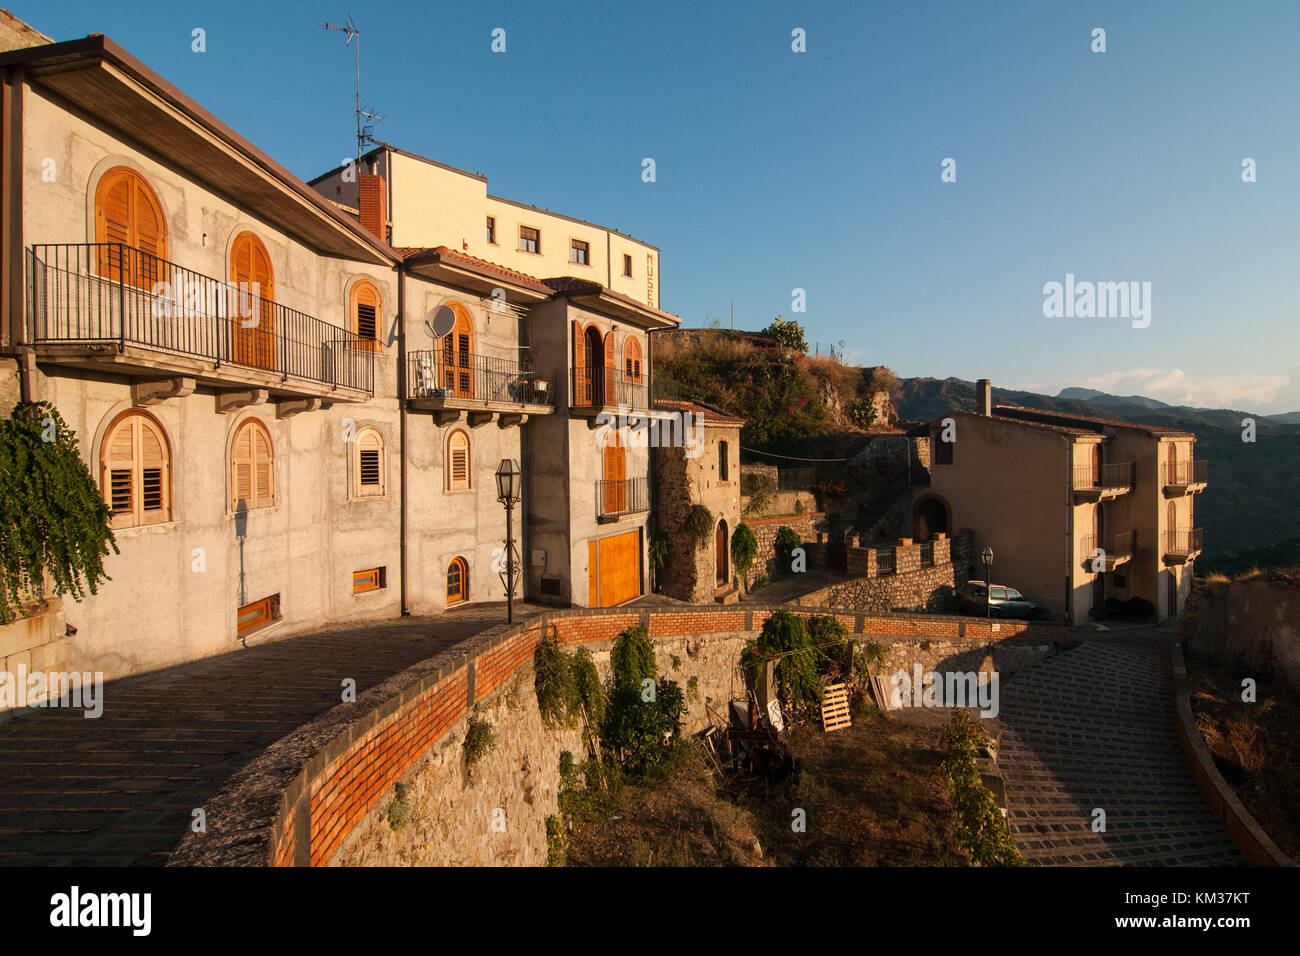 A View Of The Village Of Savoca Sicily Italy The Town Was The